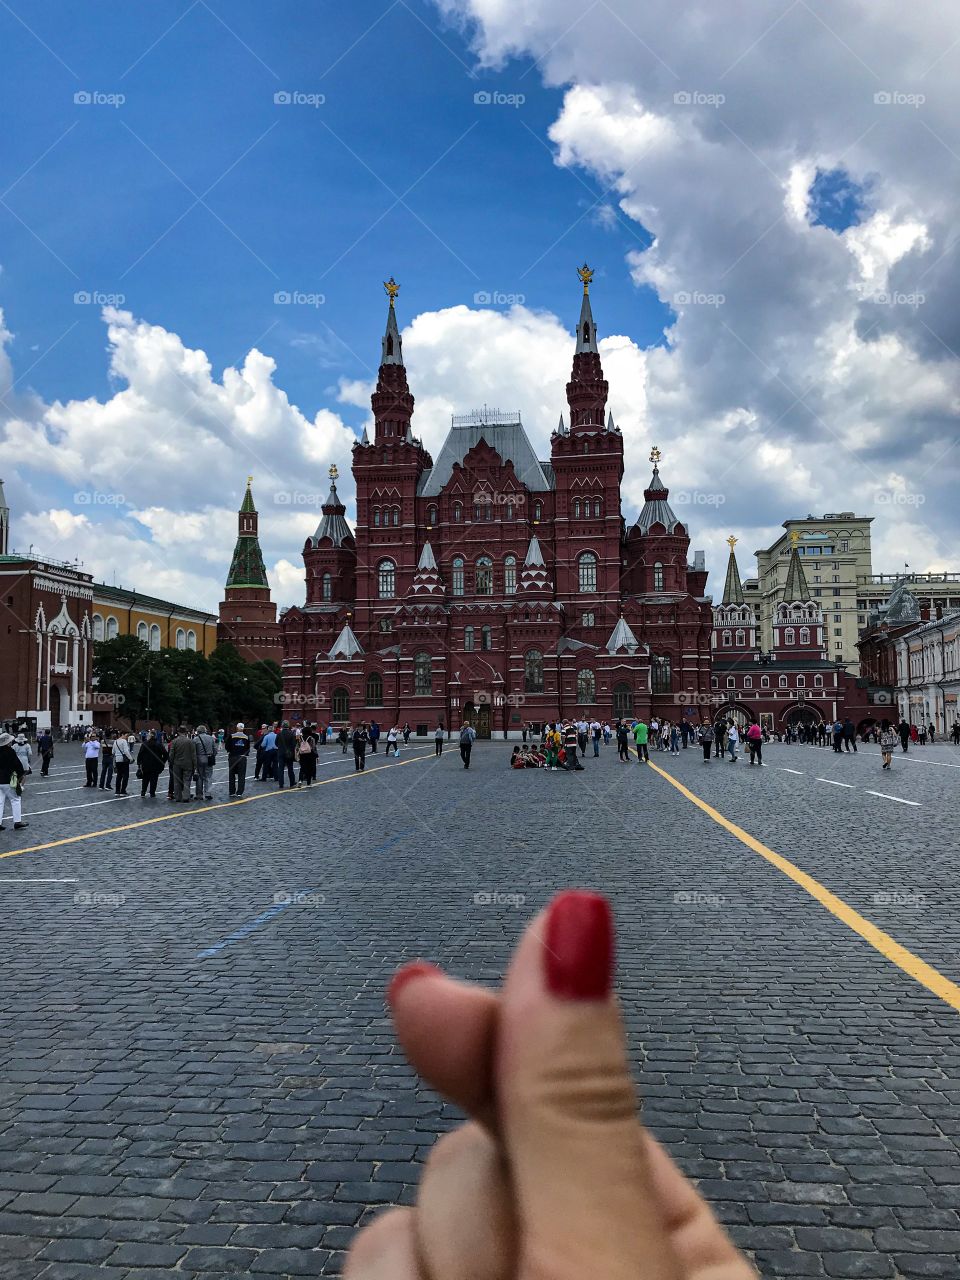 Red nails in Red Square, Russia, Moscow. Red Square is a historic fortress and centre of government known as the Kremlin. It has been the scene of executions, demonstrations, riots, parades, and speeches. 